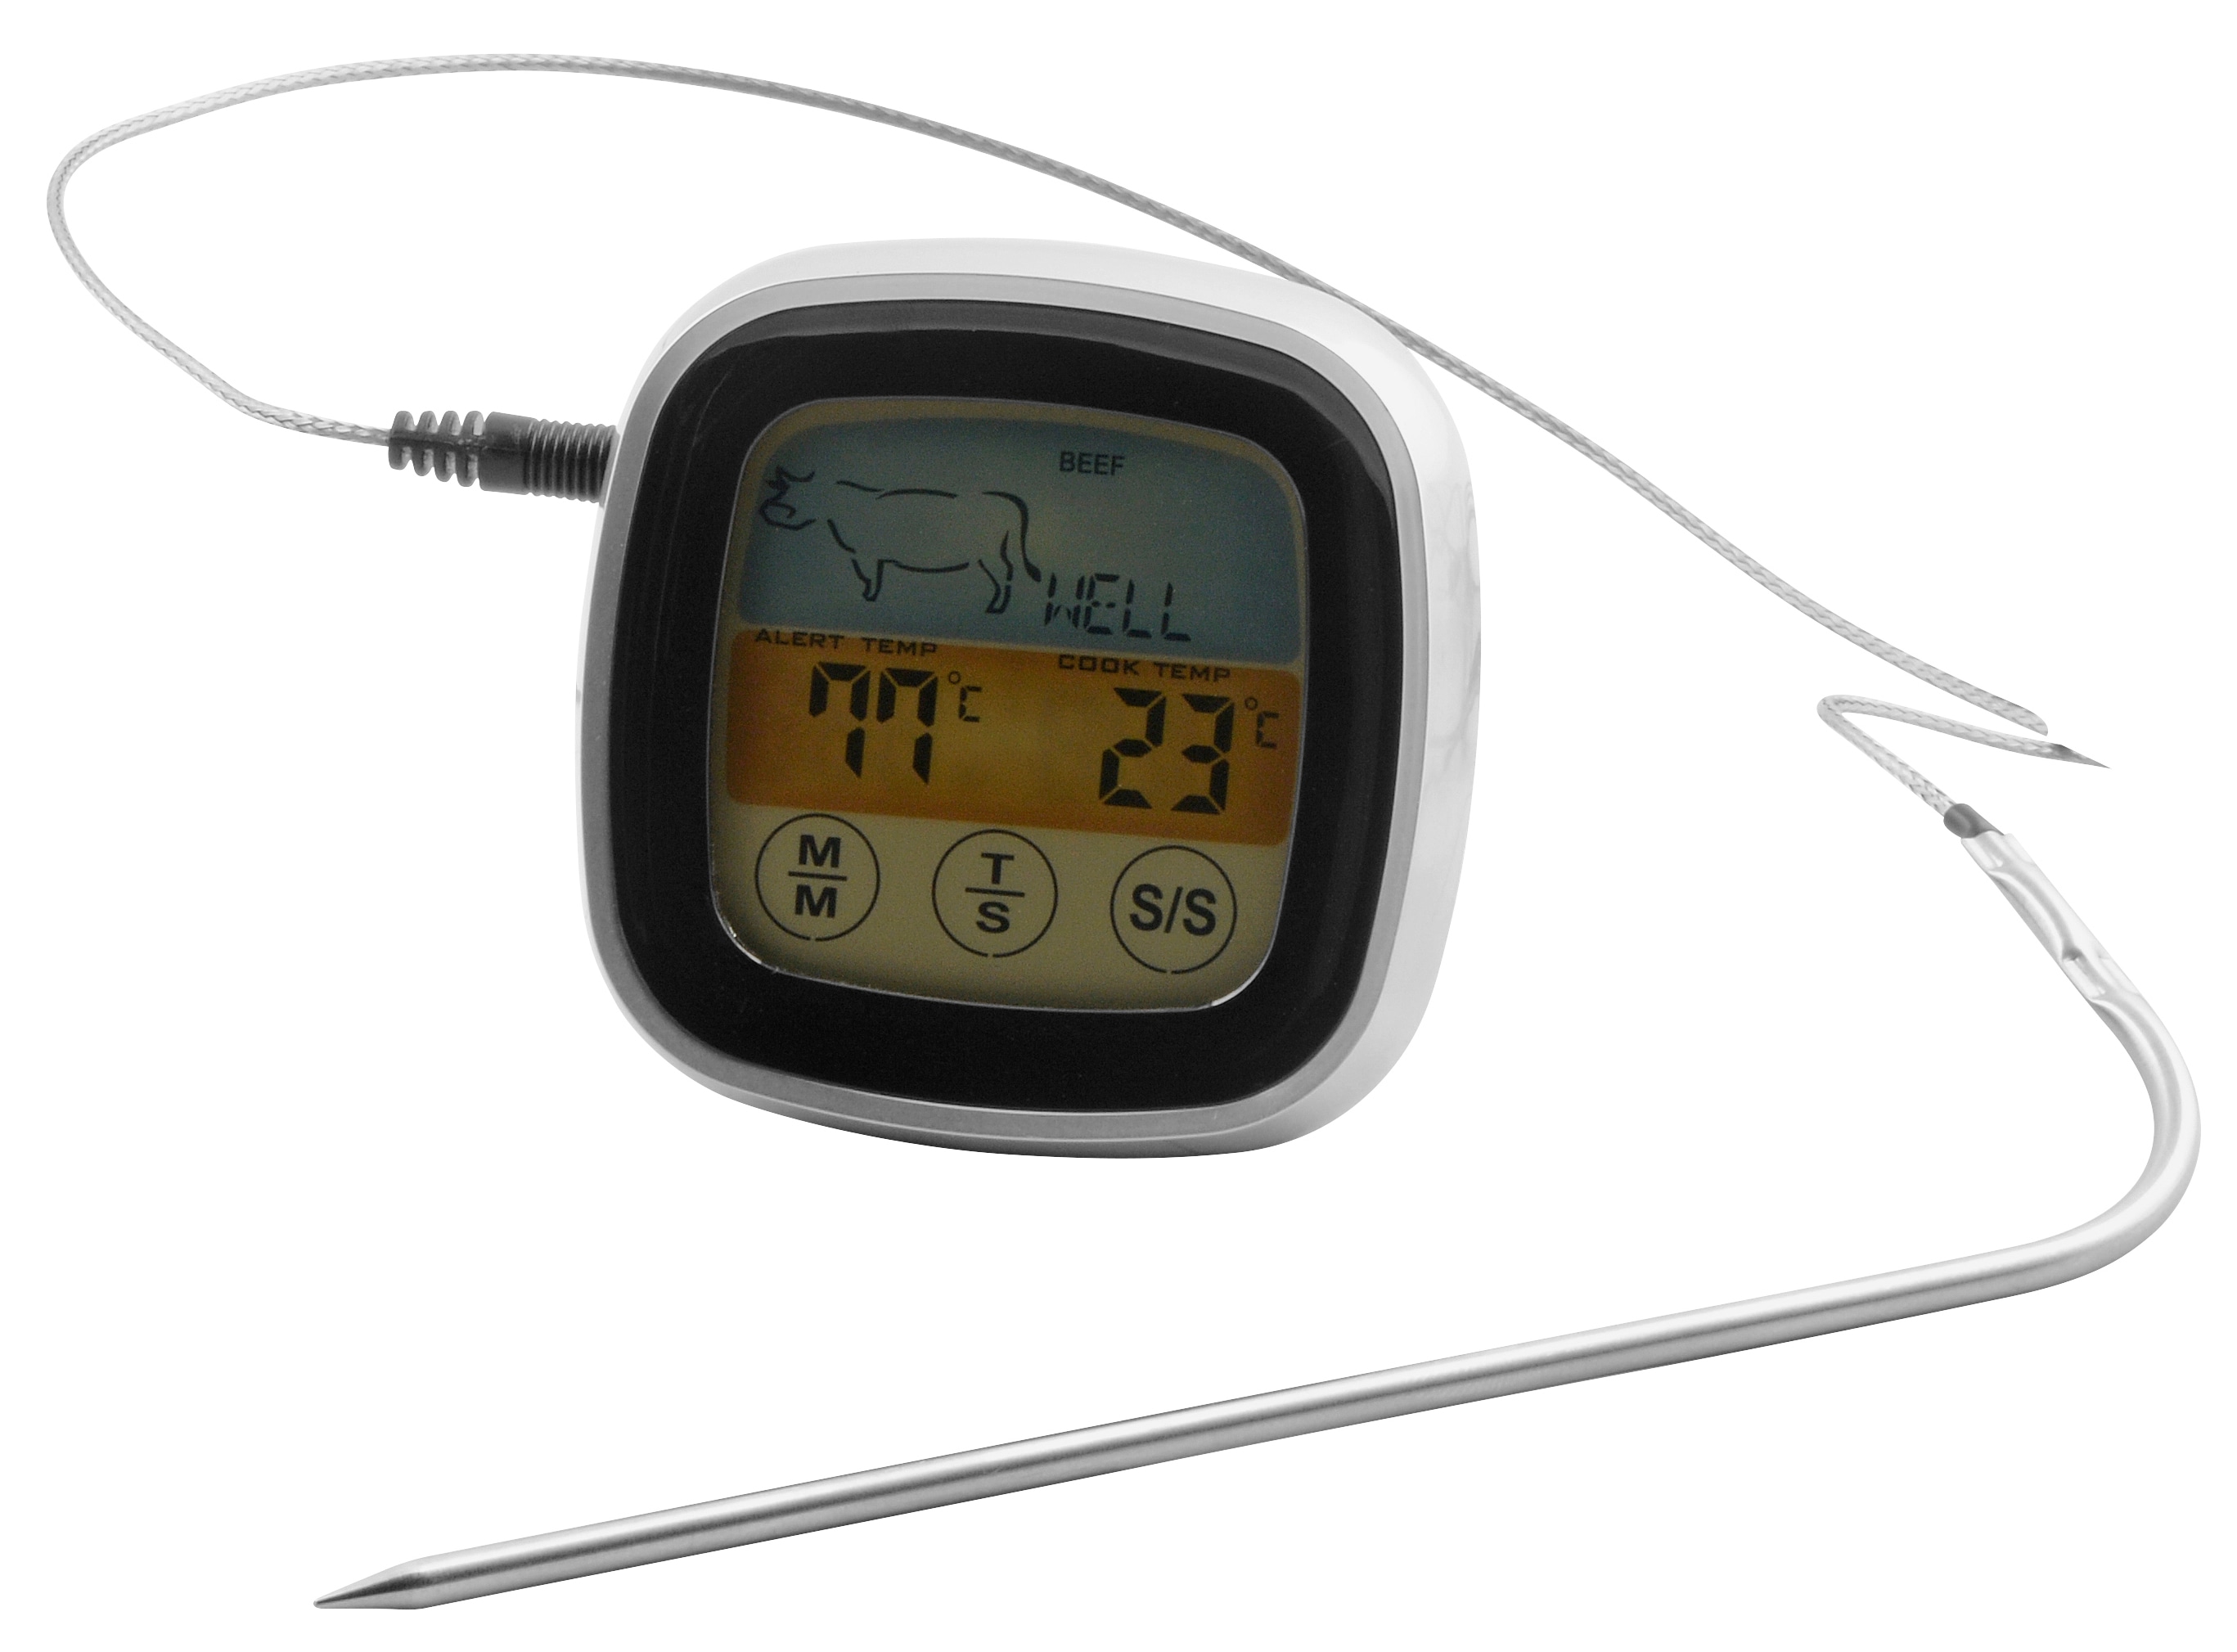 Digitale oventhermometer